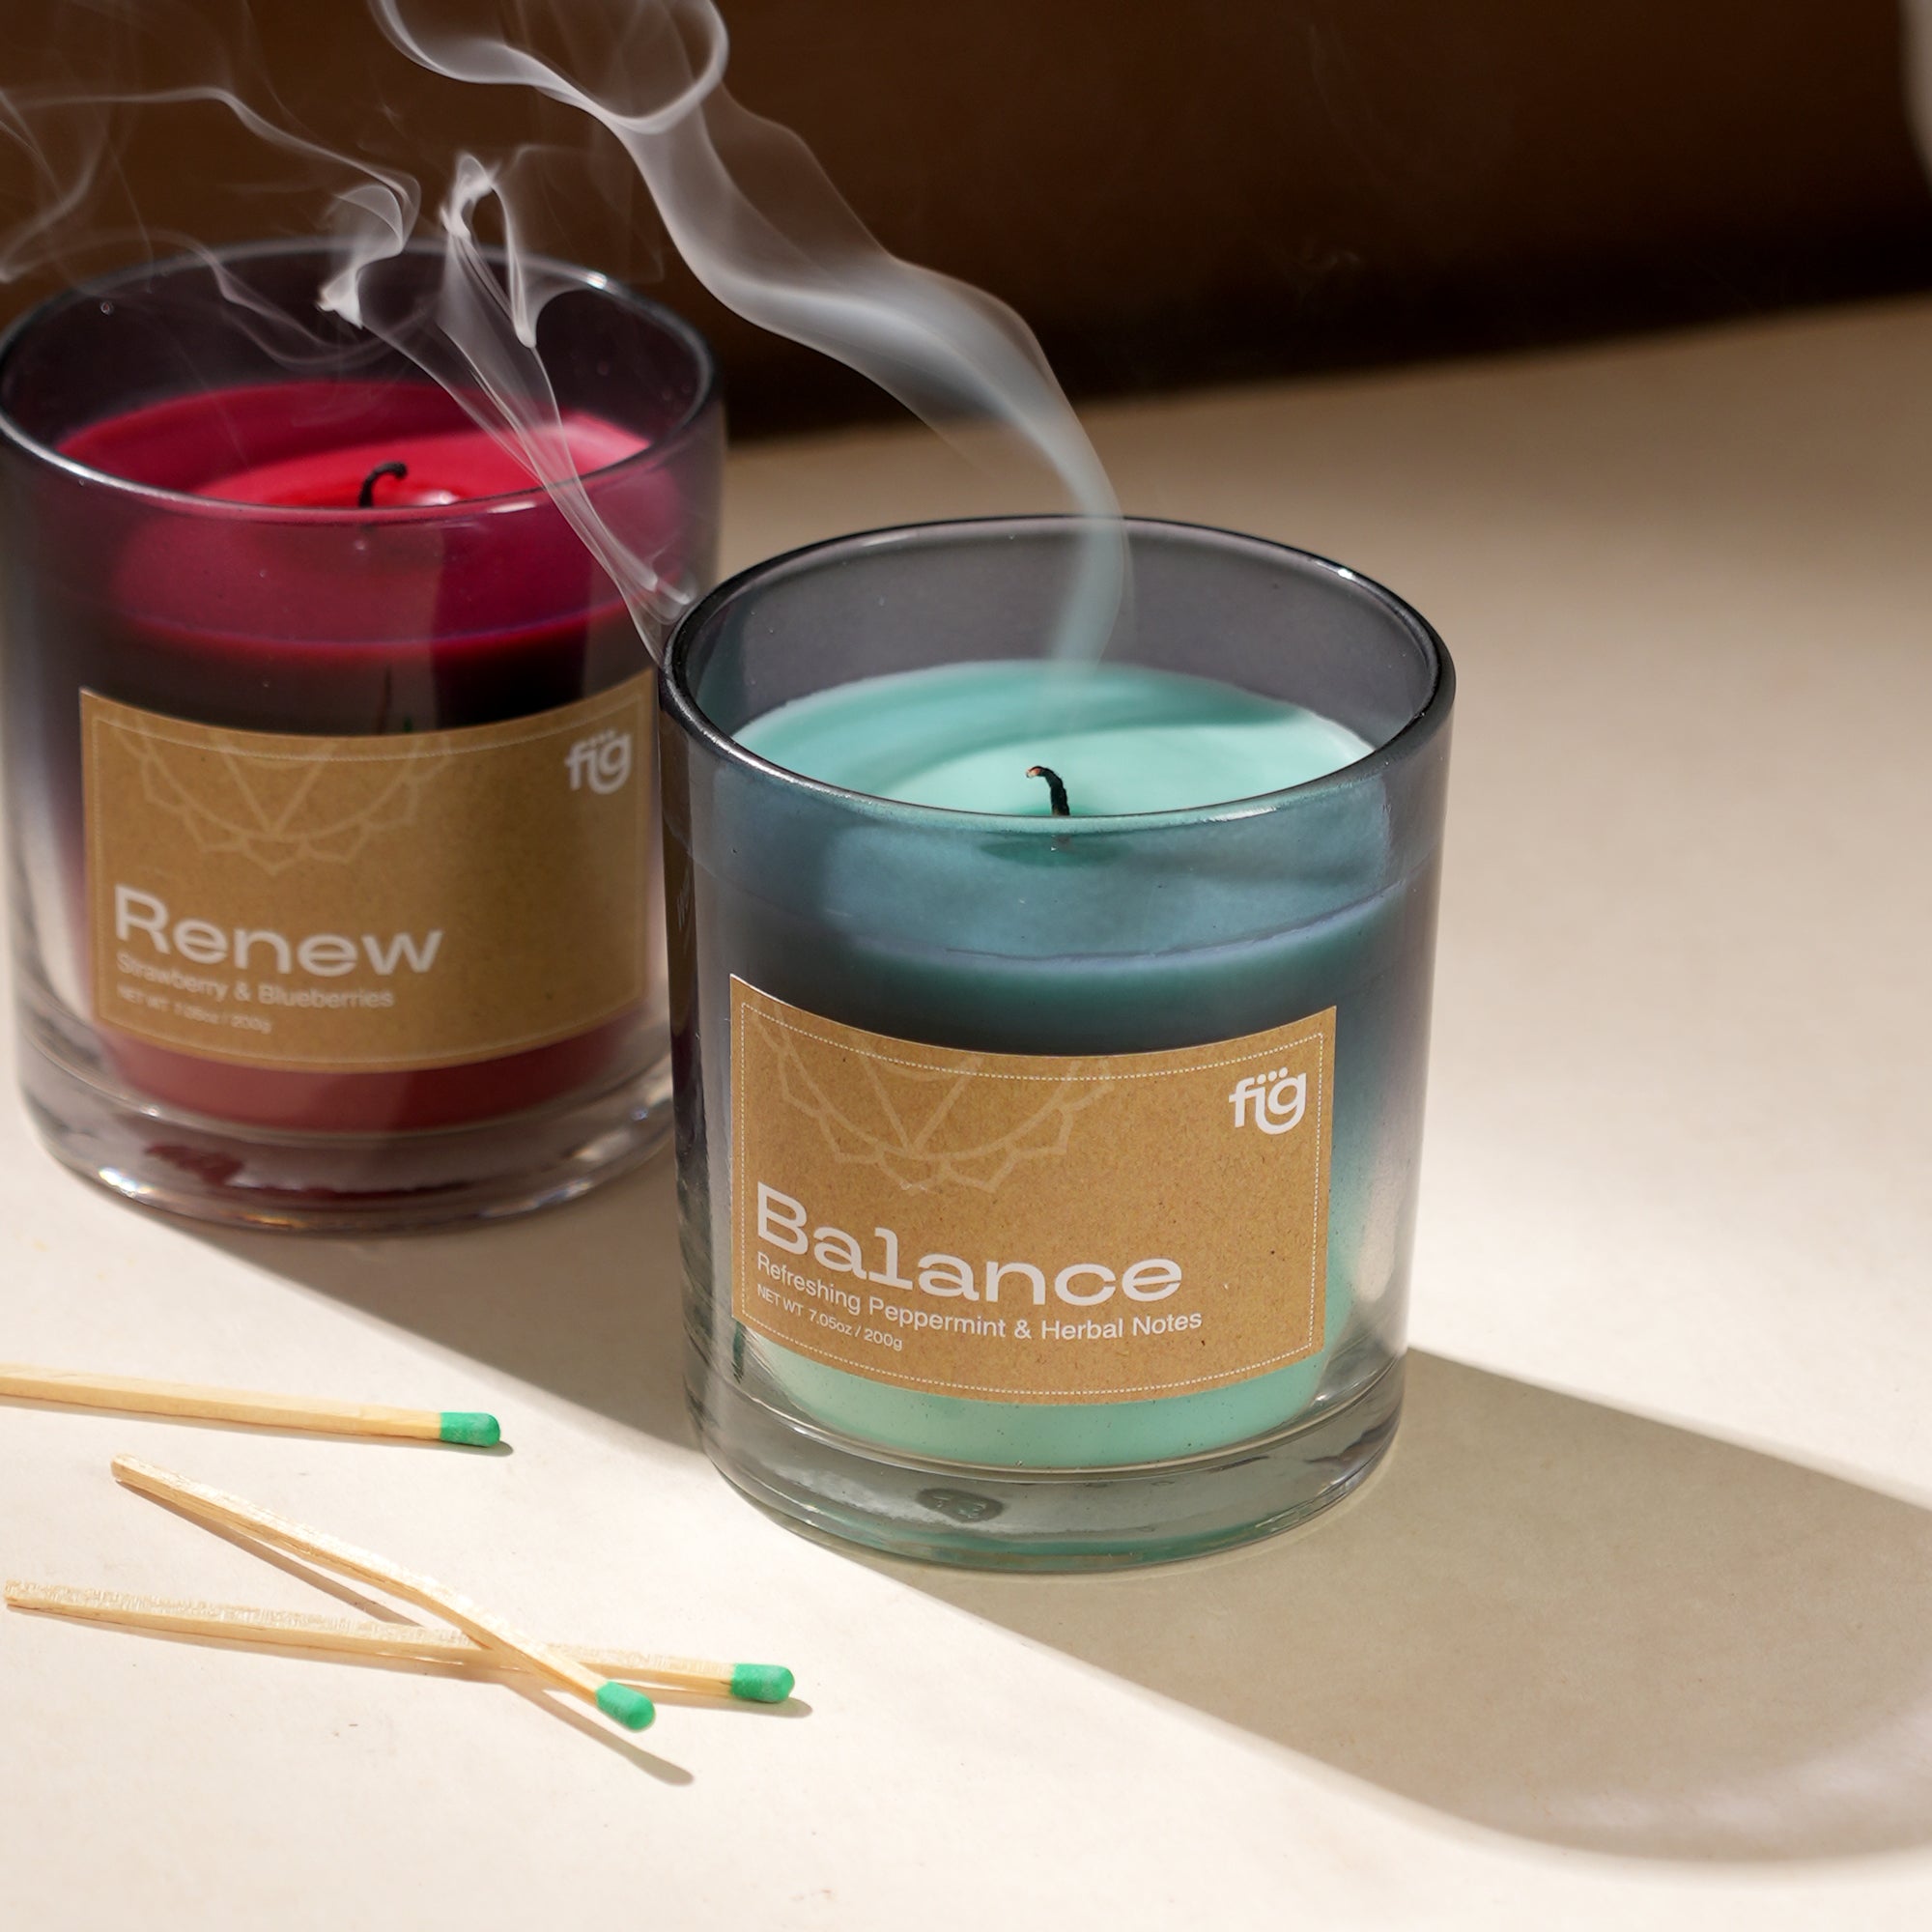 Balance Peppermint Vegan Wax Candle - Palm Wax Scented Candle